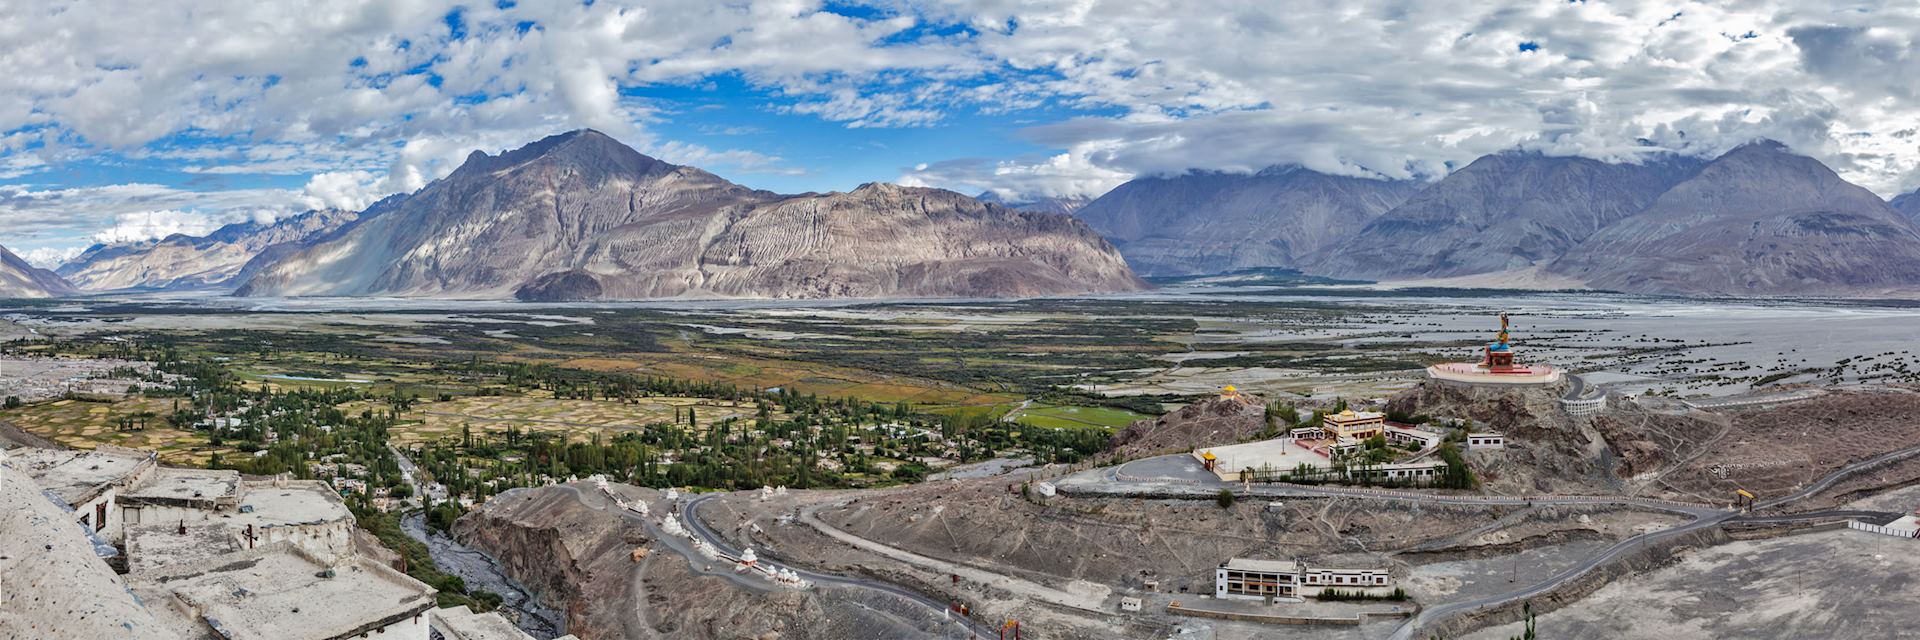 https://media.audleytravel.com/-/media/images/home/indian-subcontinent/india/country-guides/walking-holidays-in-india/istock527139009_nubra_valley_800x2400.jpg?q=79&w=1920&h=640